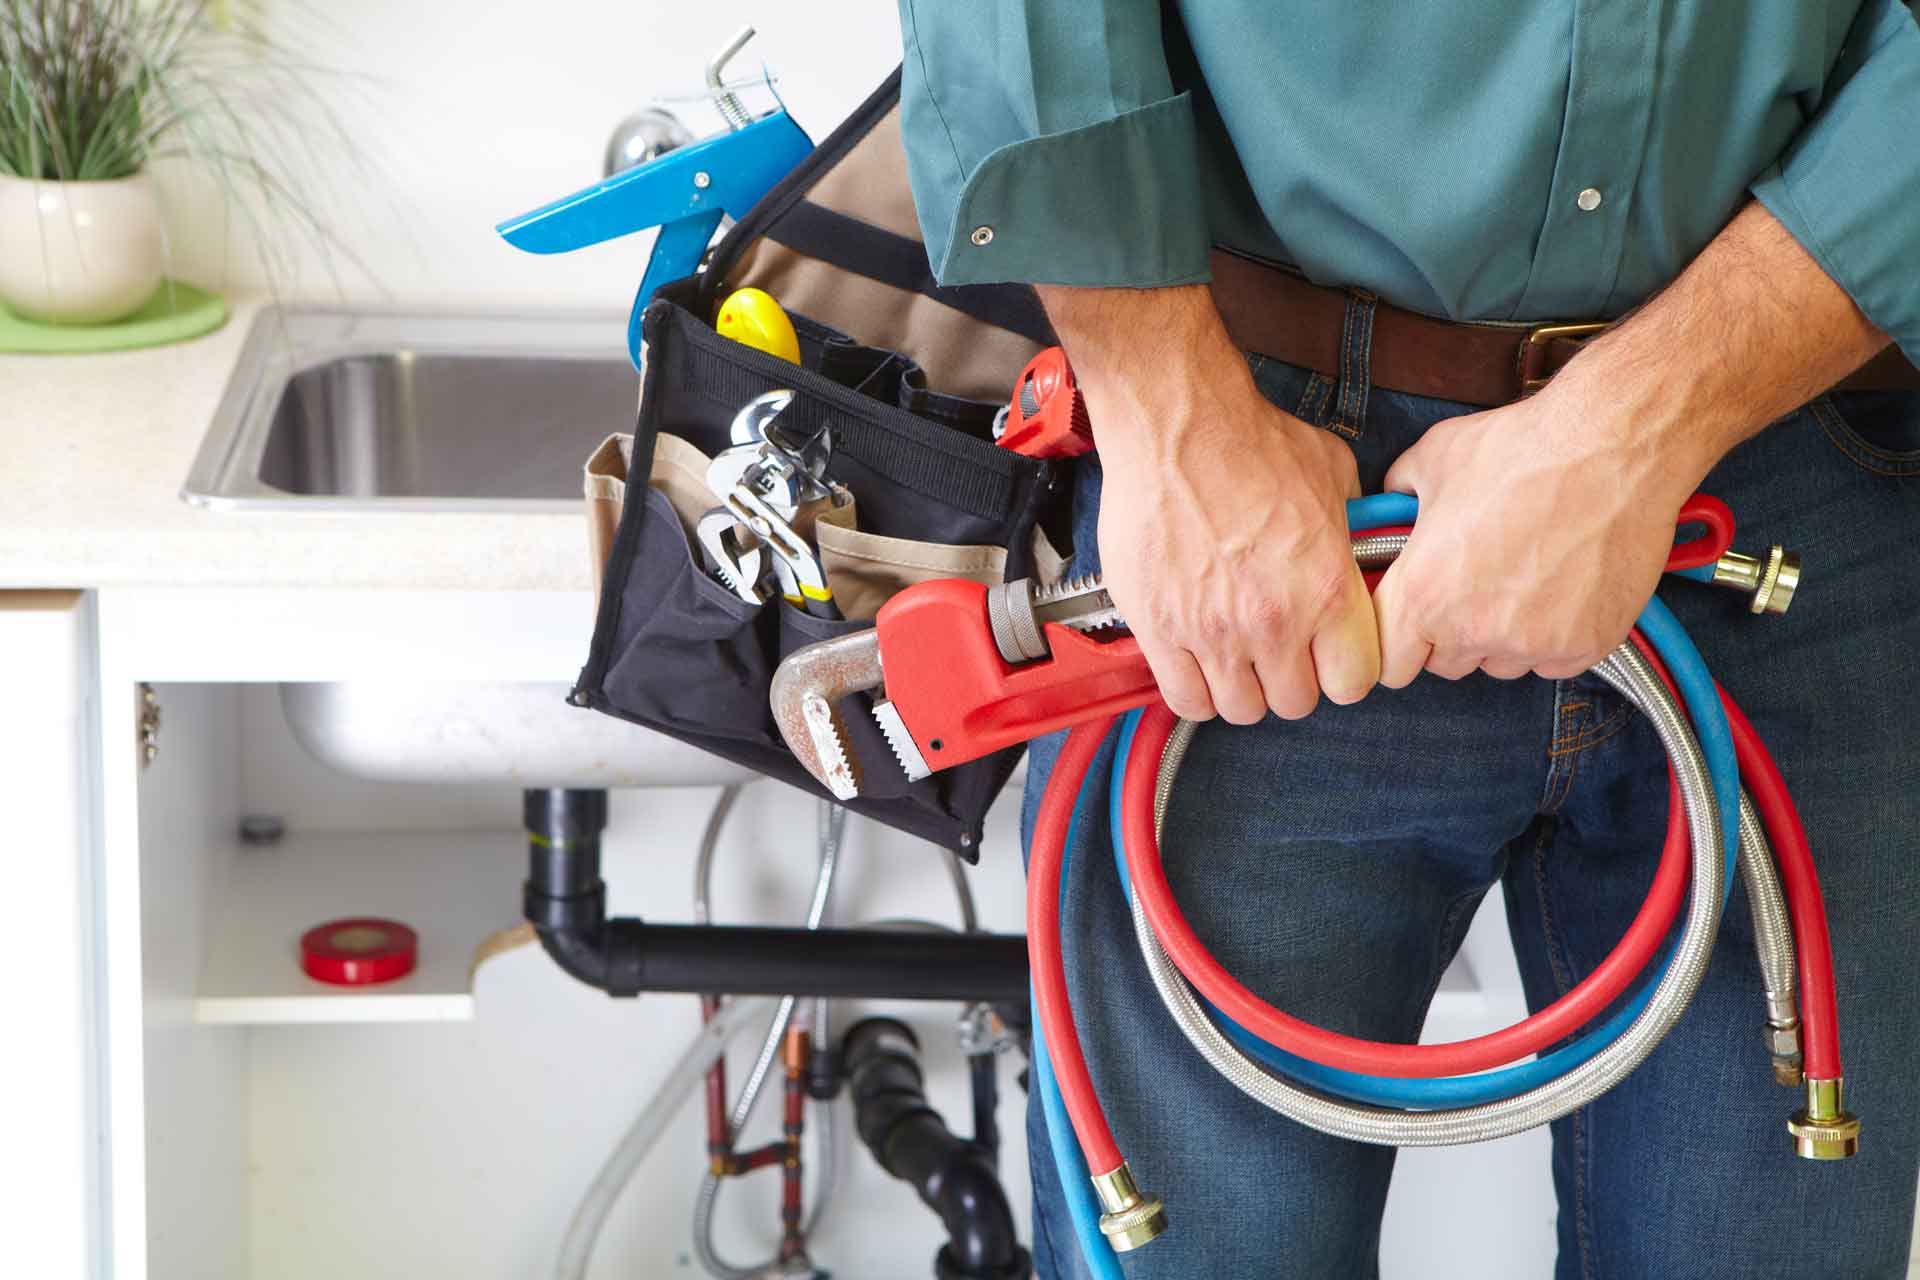 Plumber standing in front of kitchen sink with tool bag